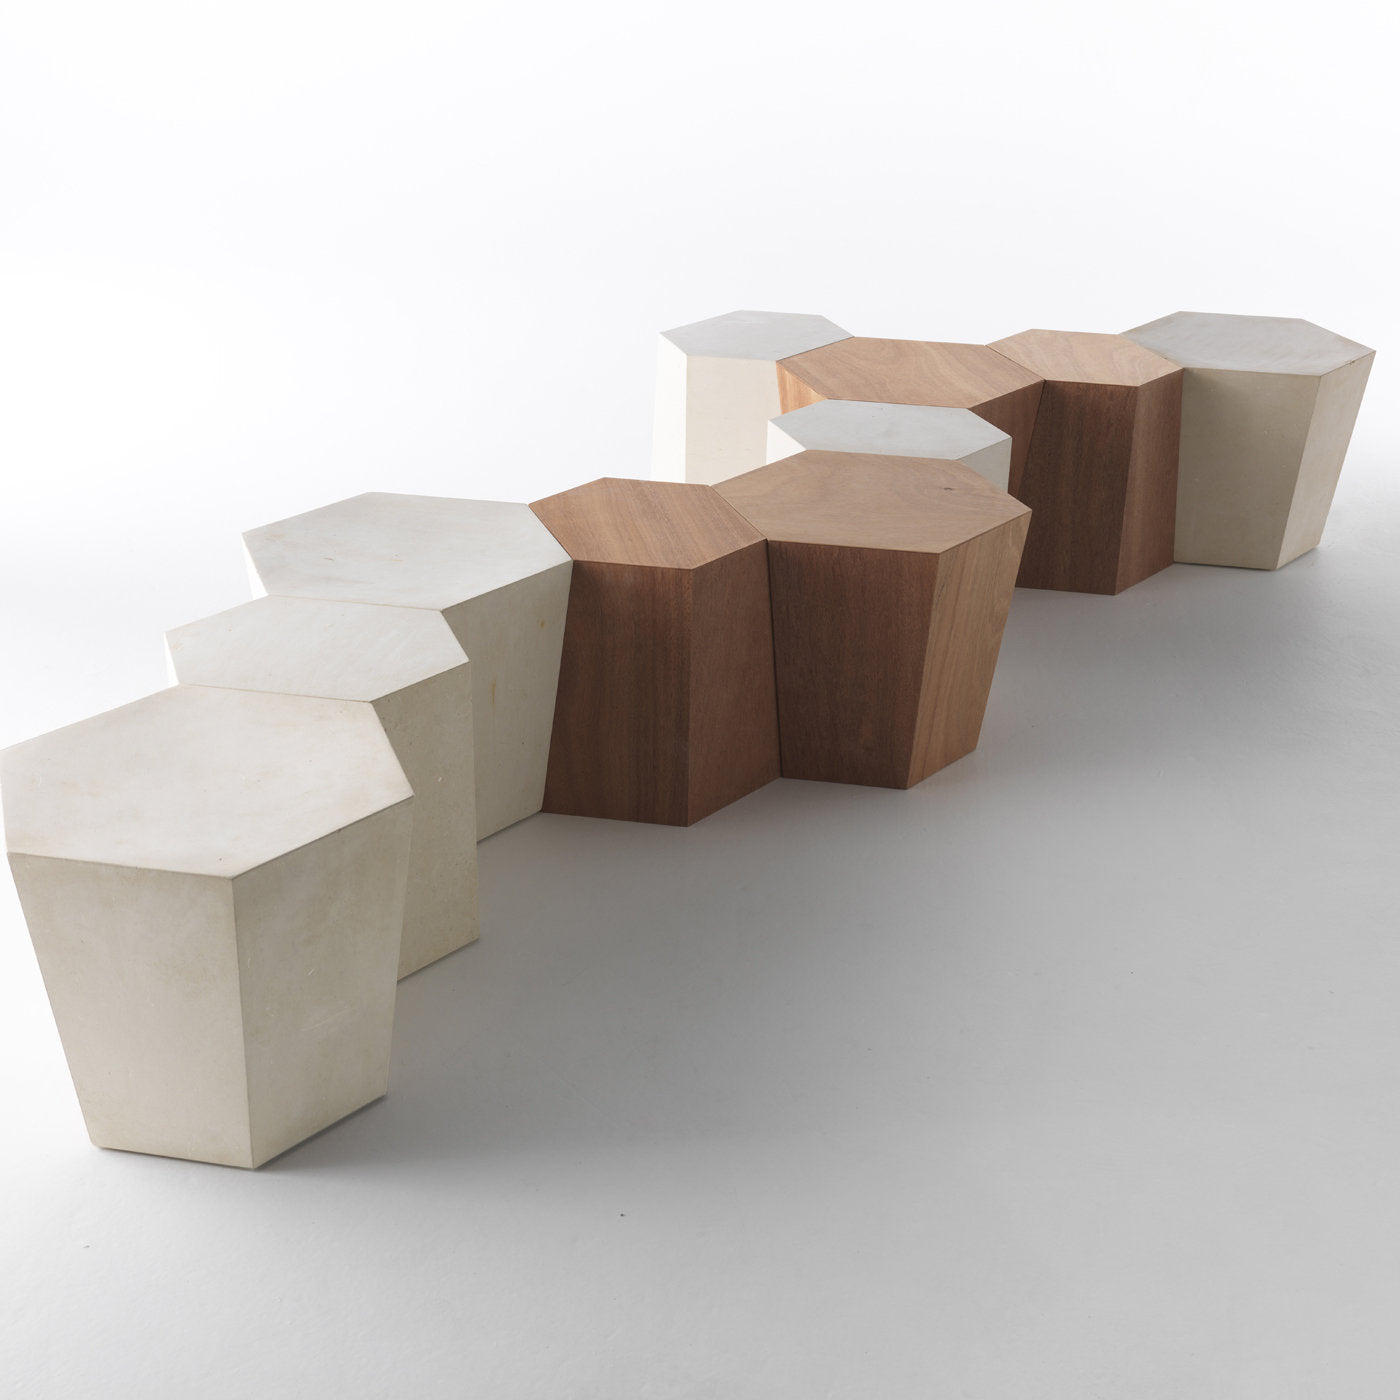 Hexagon Outdoor Coffee Table by Steven Holl - Alternative view 1